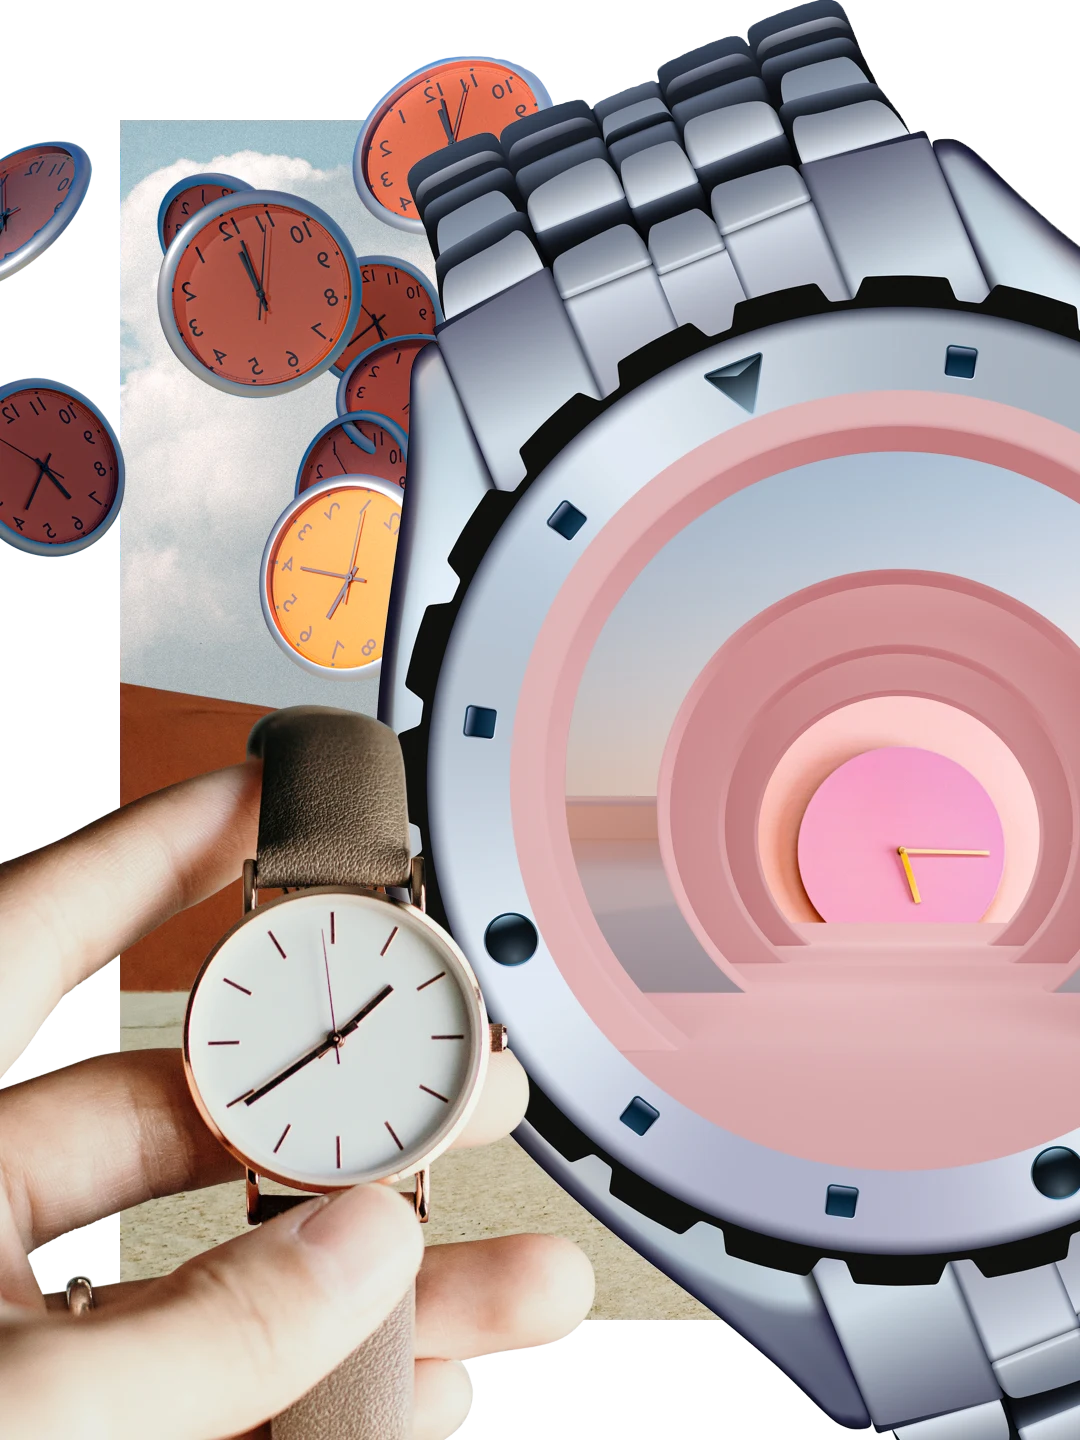 Collage of different clocks and watches. White hand holding a leather wristwatch. Big metal wristwatch in the center. Pink clock with yellow hands. Watches in shades of brown and gold floating in clouds.
